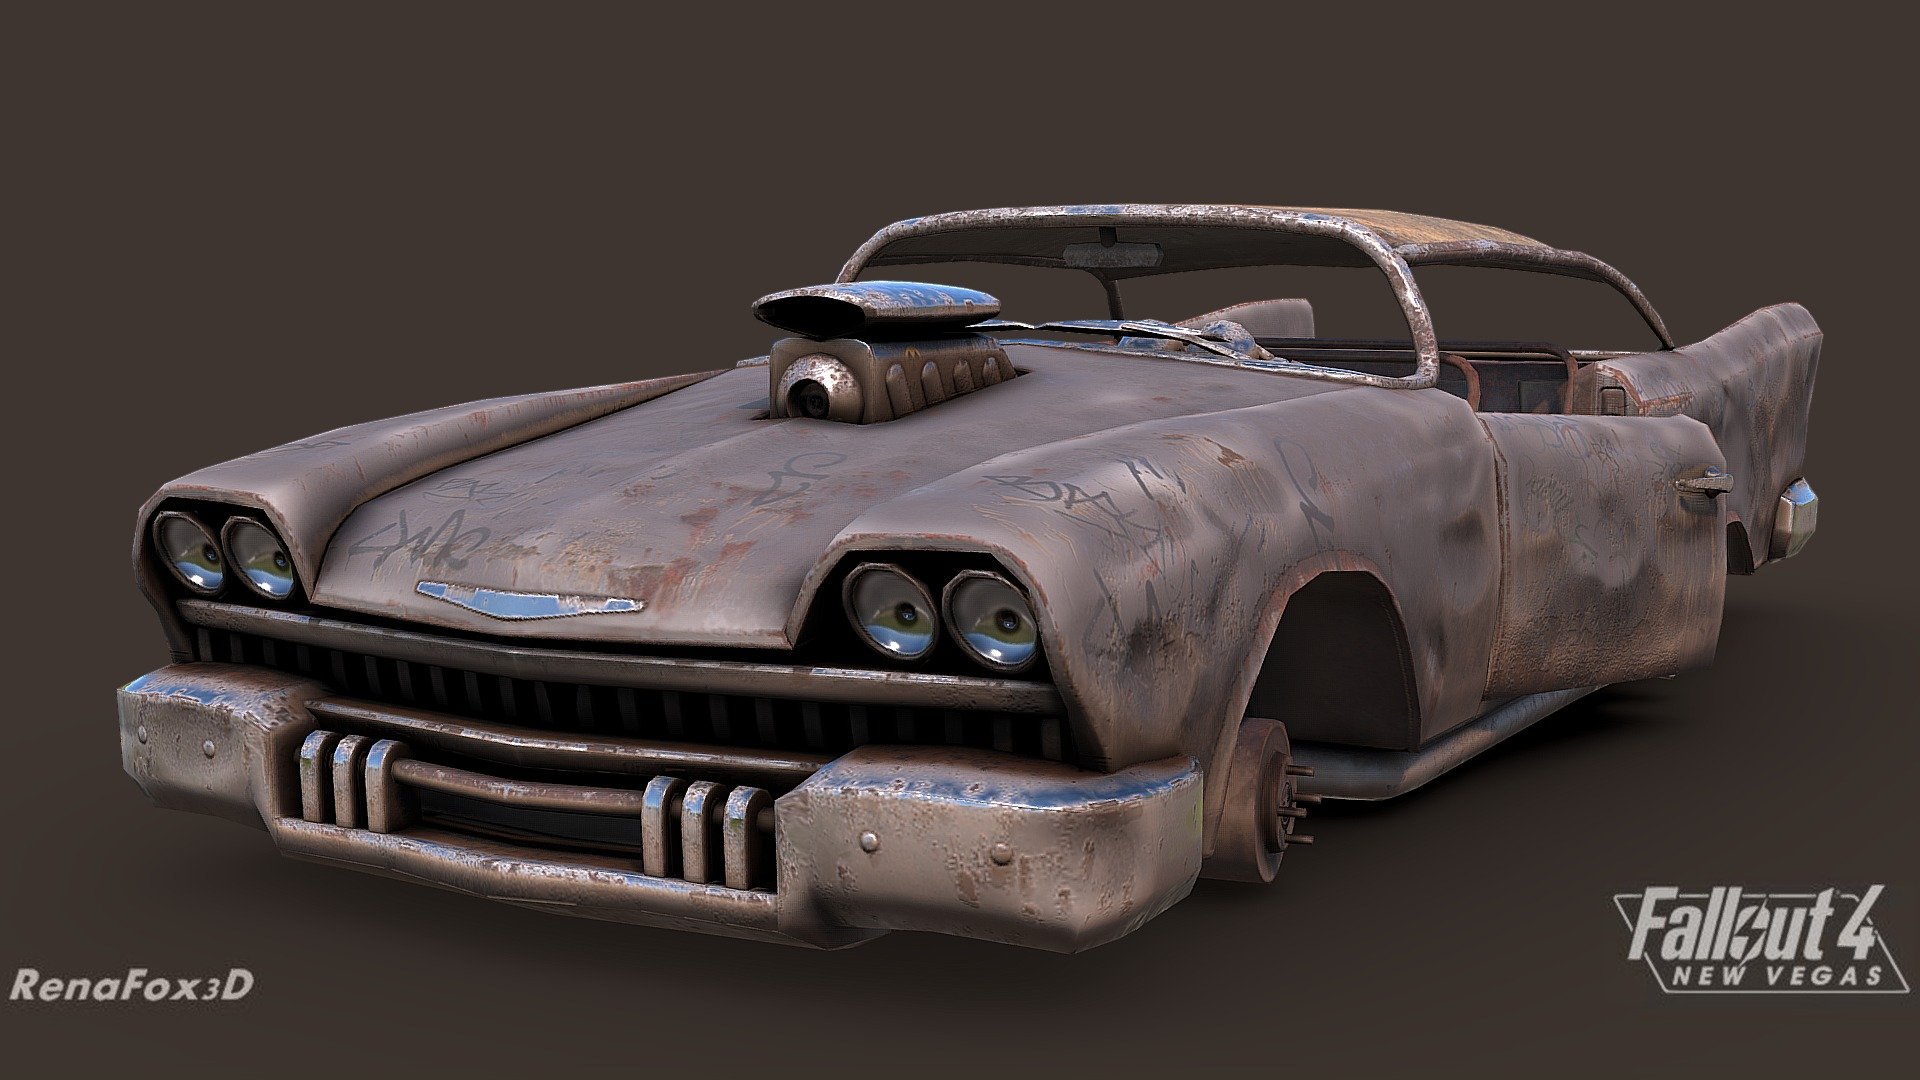 The Chosen One's car from Fallout 2, which was included in the original New Vegas as an easter egg, even though it just used a generic wreck model, for the mod, we've decided to give it a unique model.

Made with 3DSMax and Substance Painter - F4NV - Highwayman Wreck - 3D model by Renafox (@kryik1023) 3d model